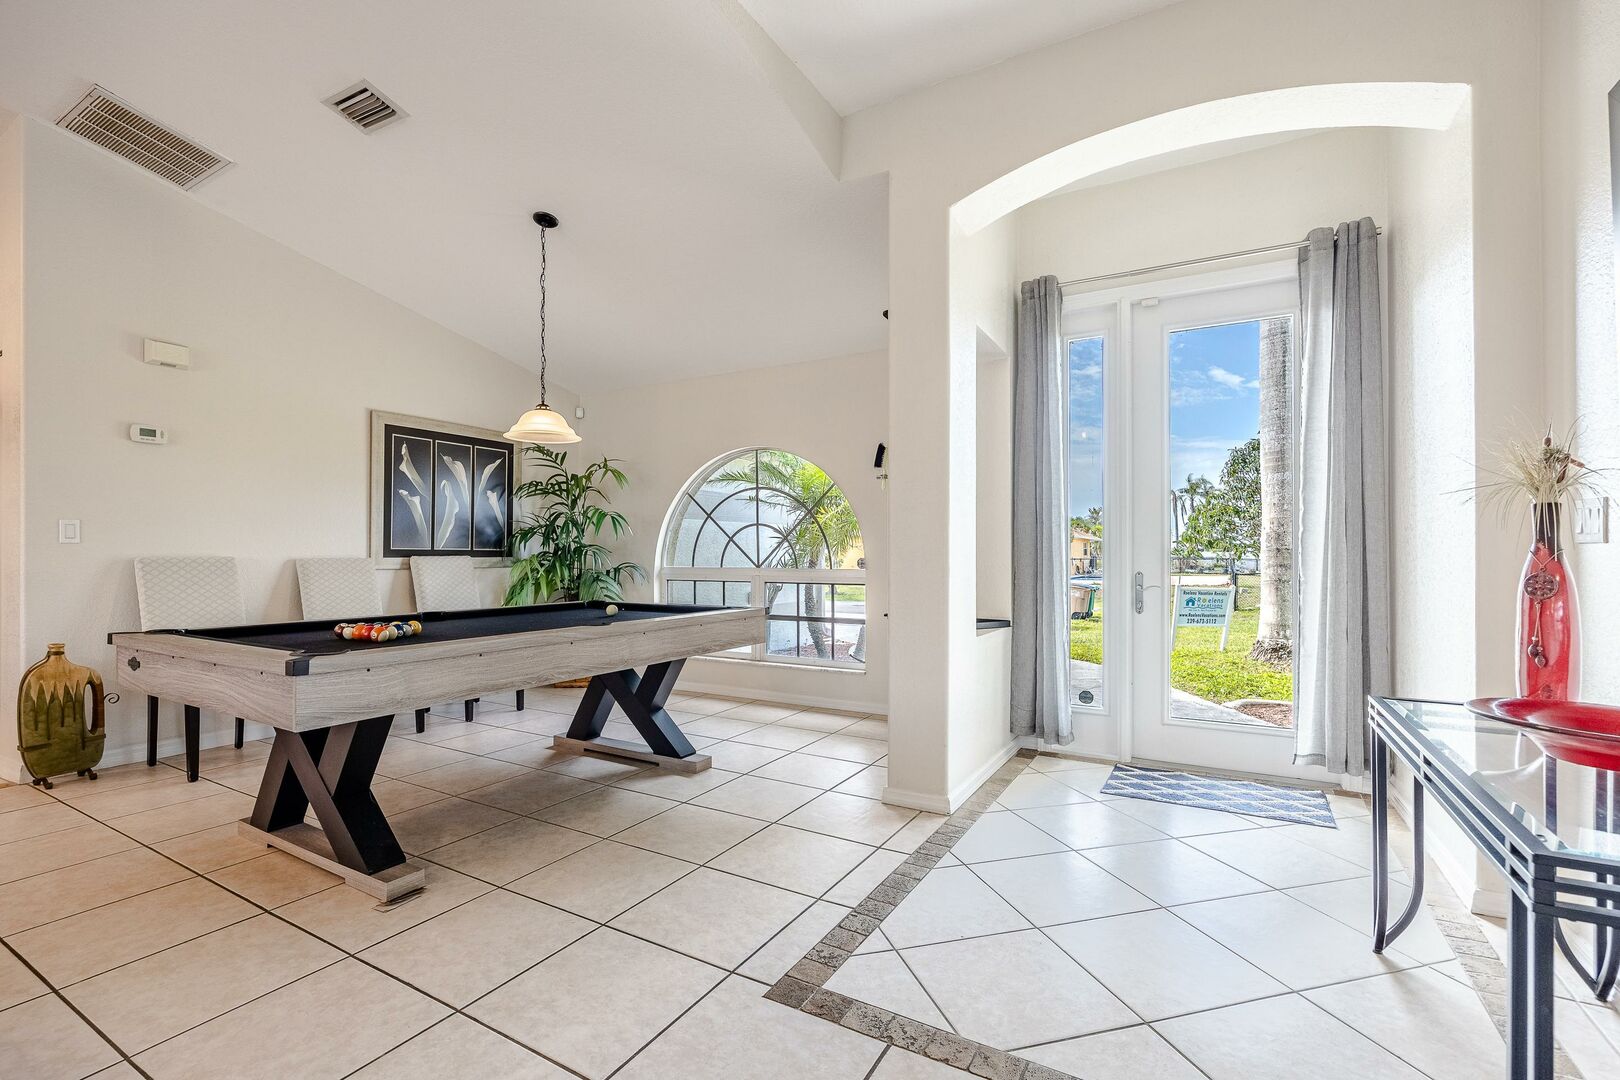 5 bedroom vacation home with pool table